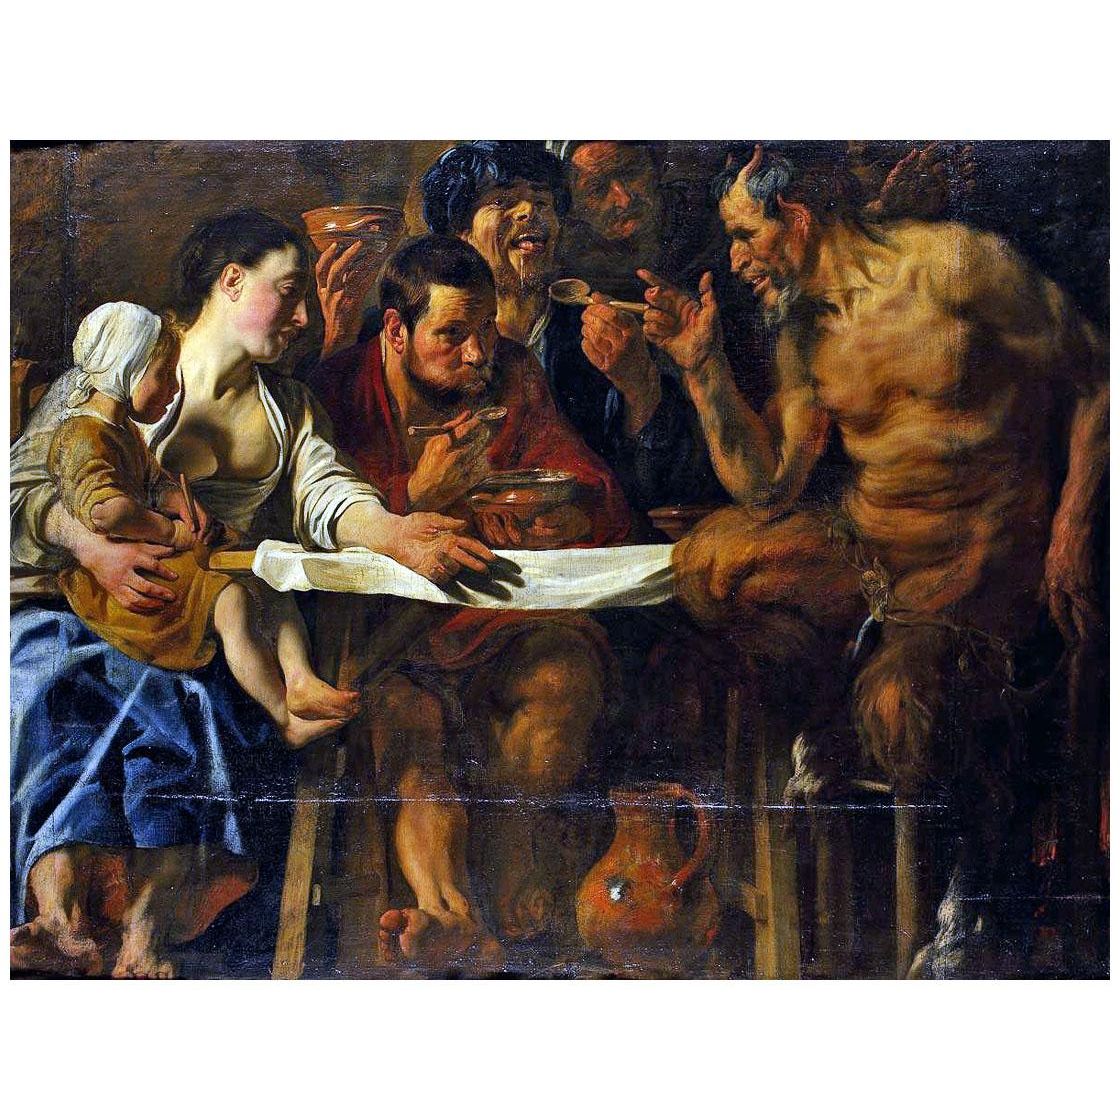 Jacob Jordaens. The Satyr and the Peasant. 1922. Pushkin Museum Moscow